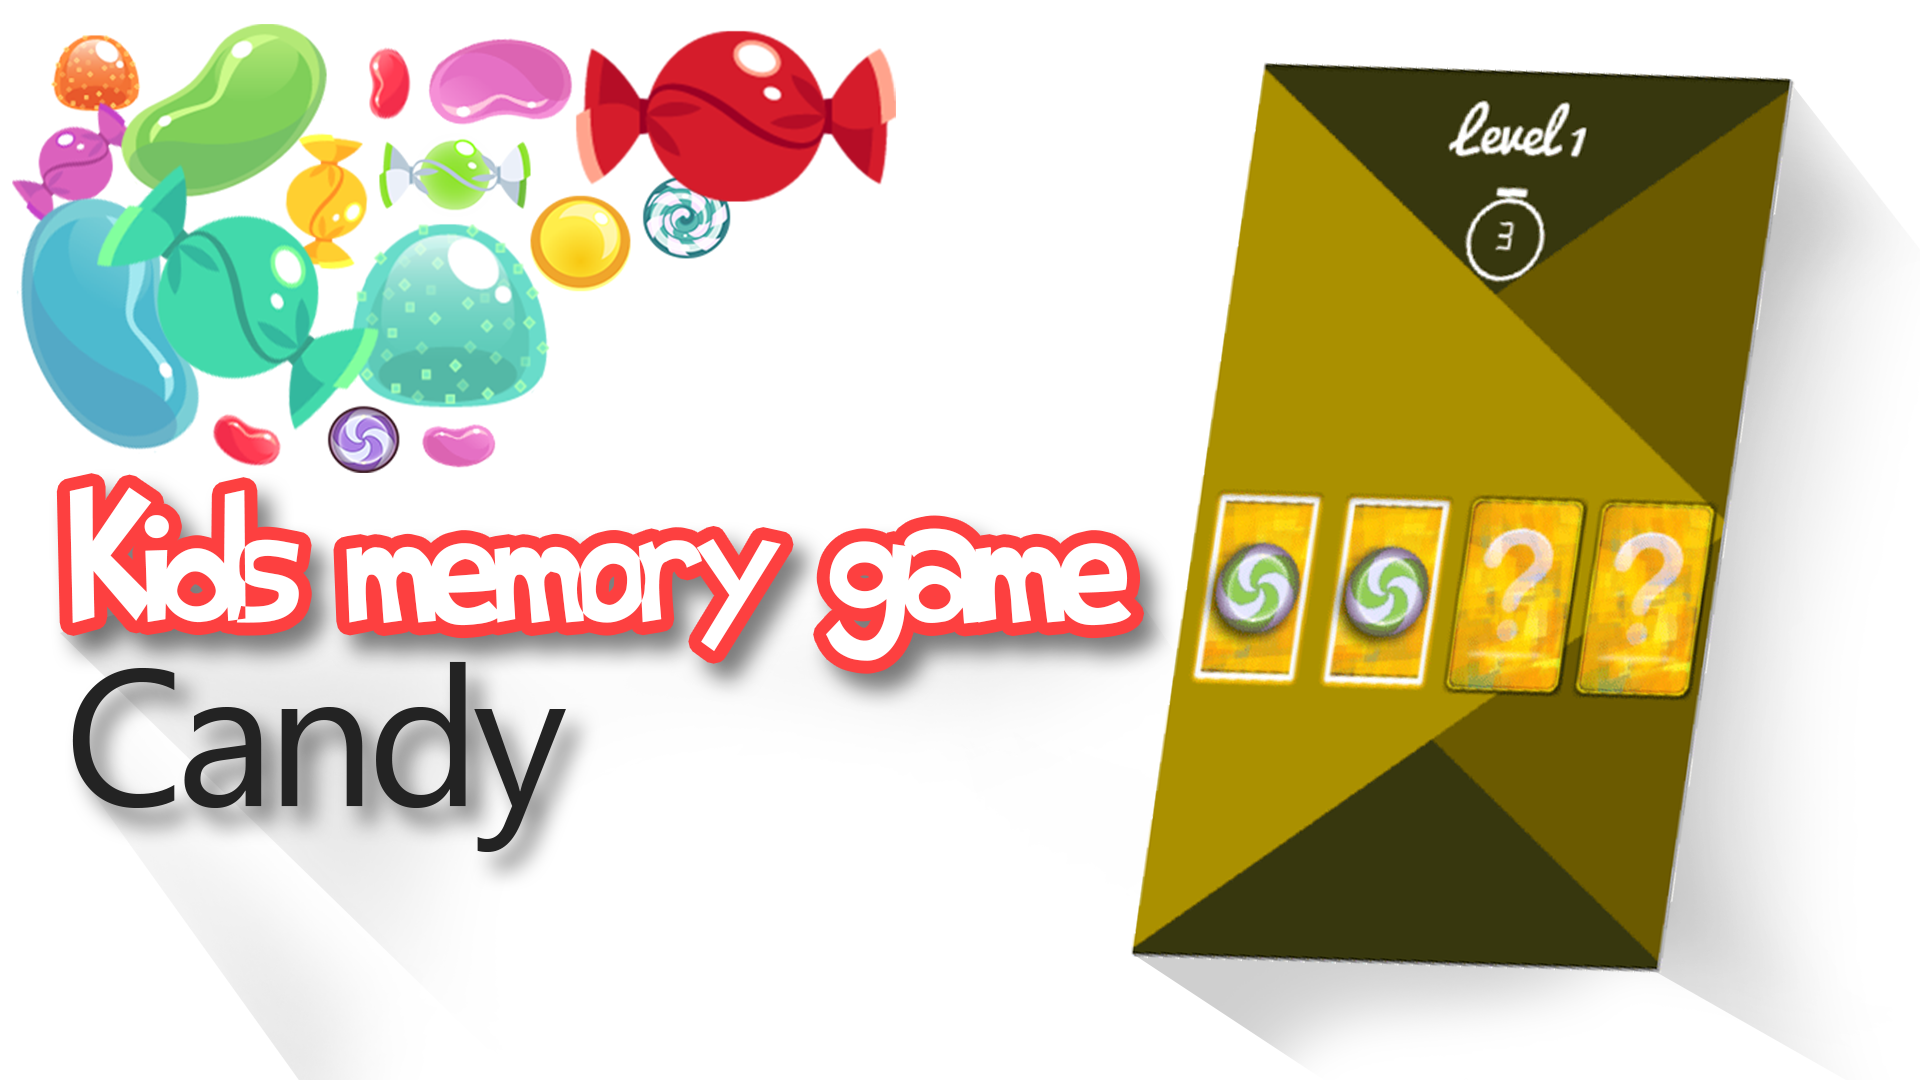 Kids memory game Candy